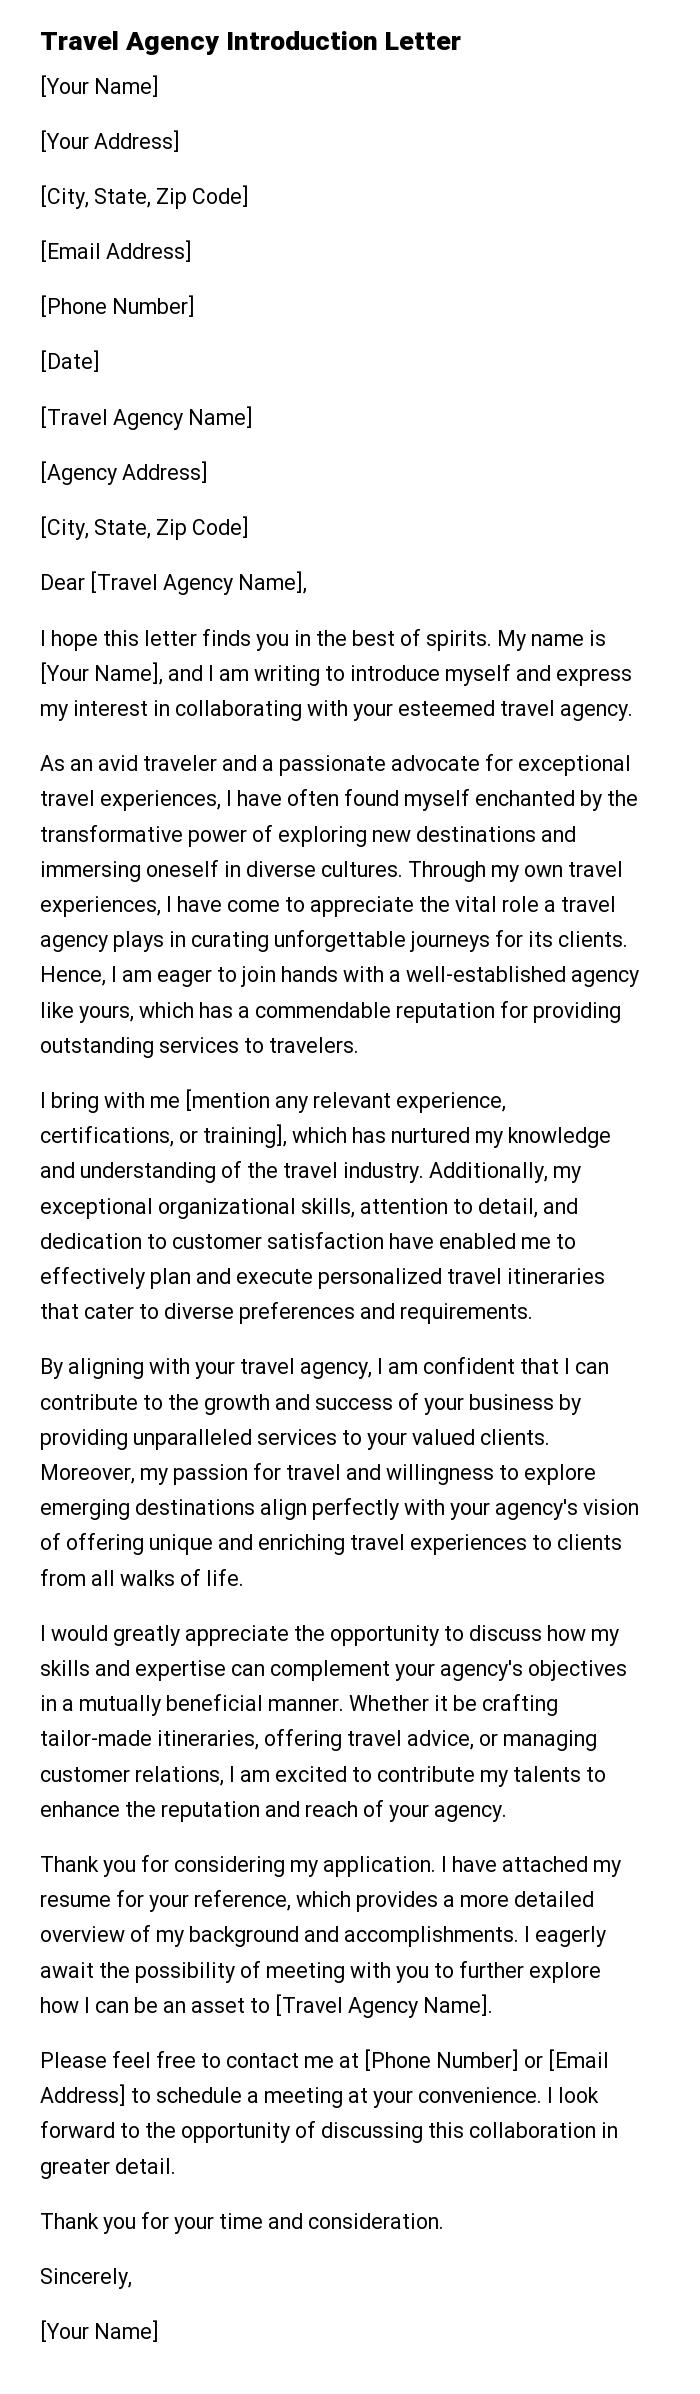 Travel Agency Introduction Letter